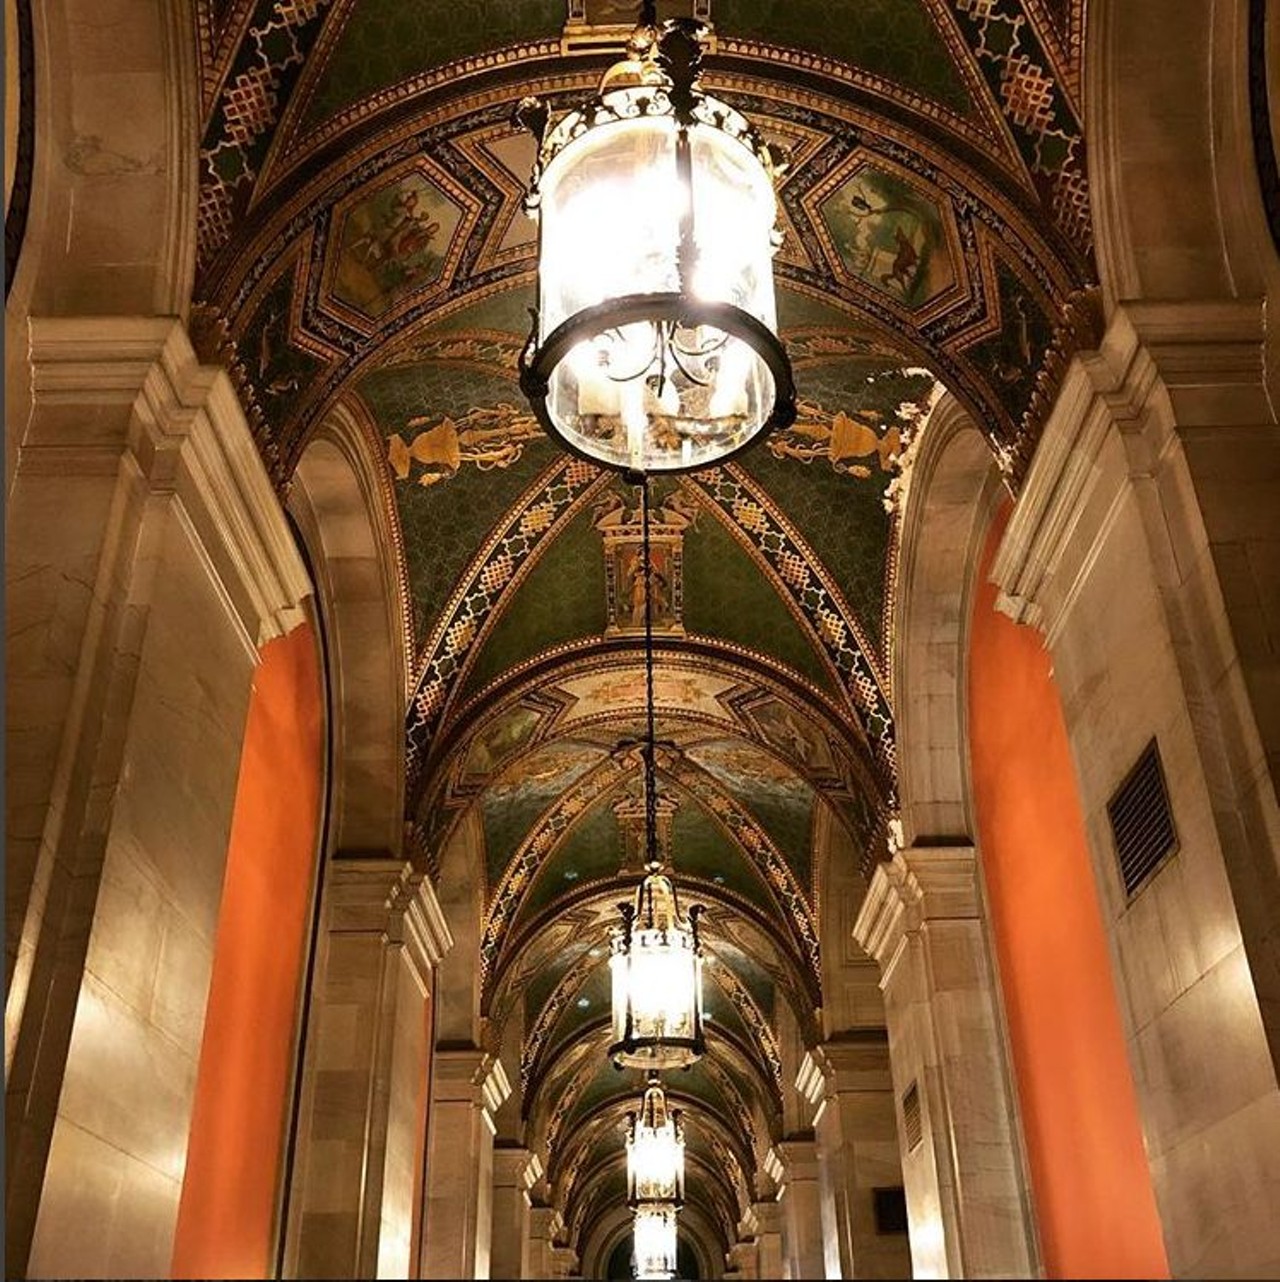  The third floor of the Detroit Public Library  
Away from the tourists and the kids&#146; lounge, the third floor offers the seclusion and silence every loner craves. 
Photo via Instagram, user Georgirenee 